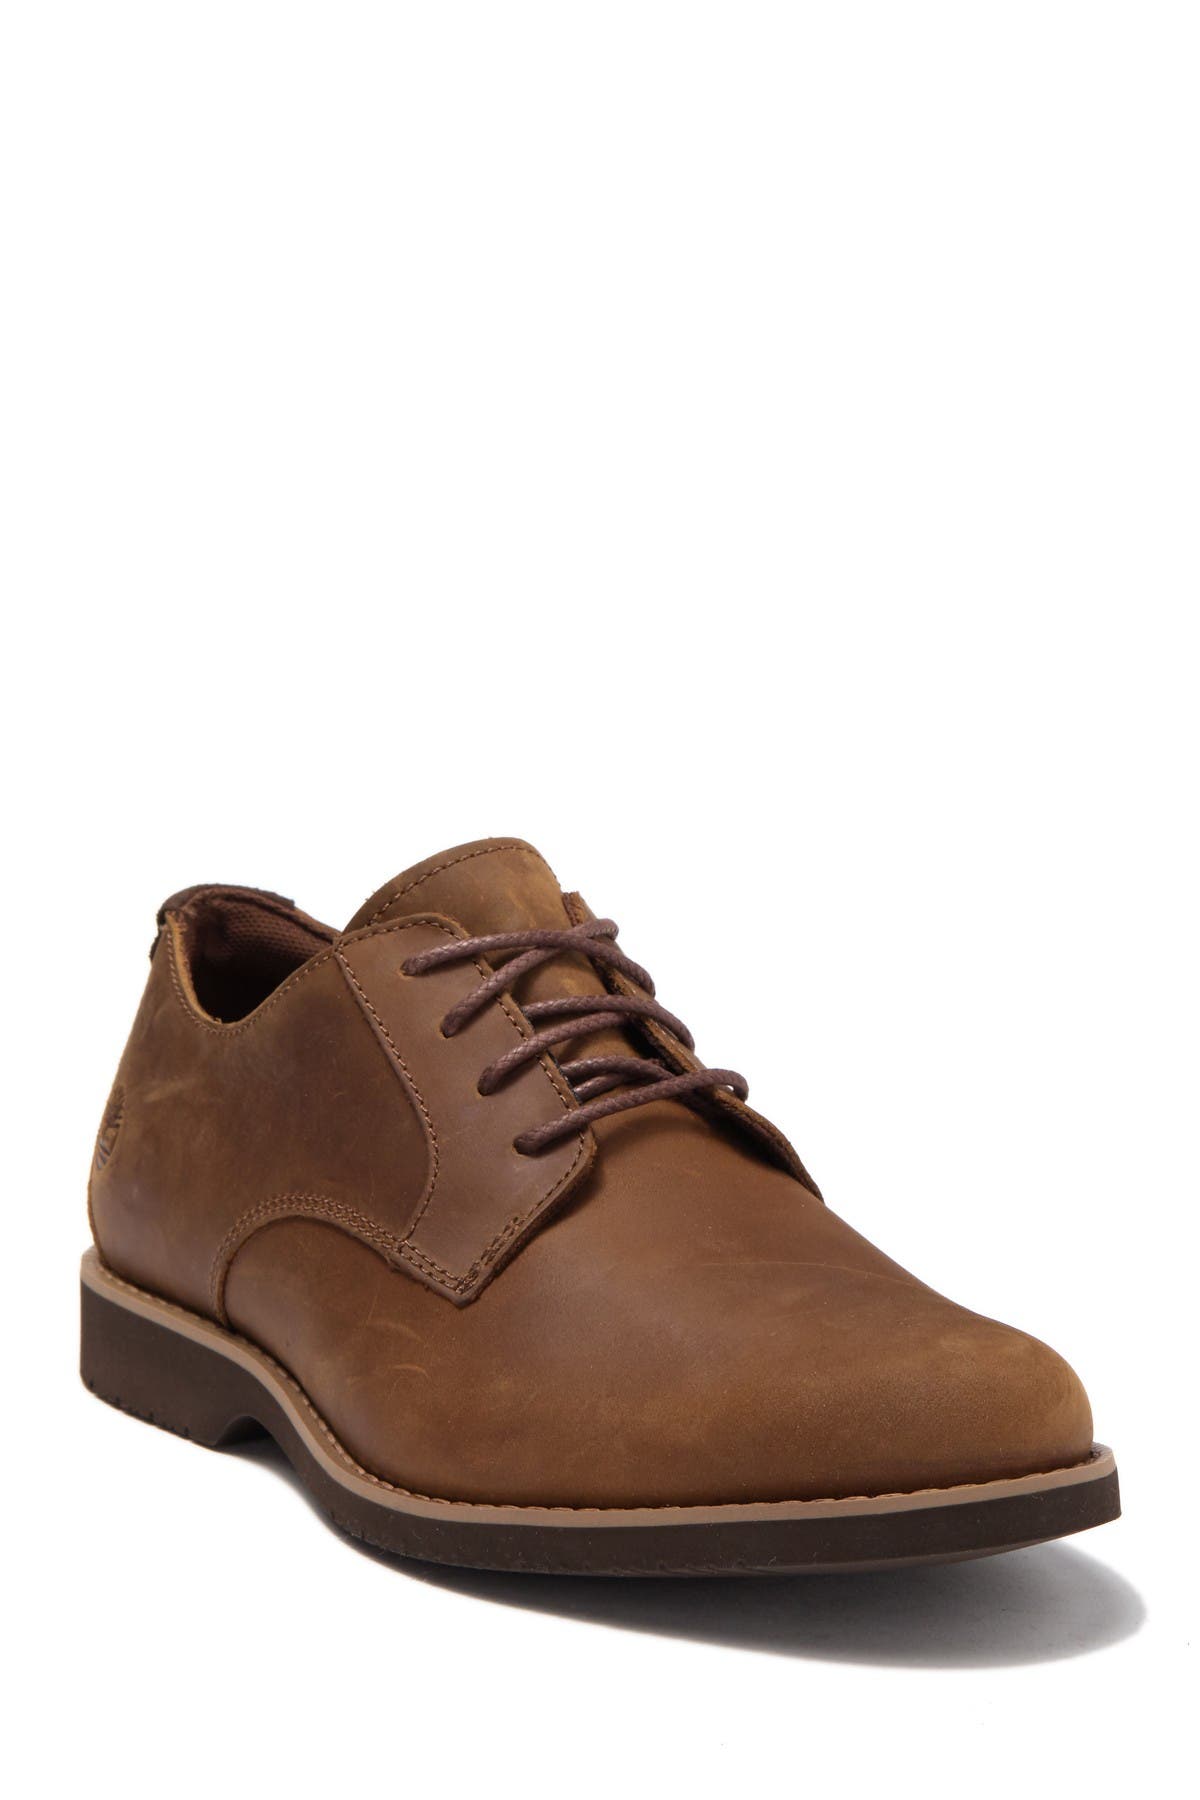 Timberland | Woodhull Leather Oxford 